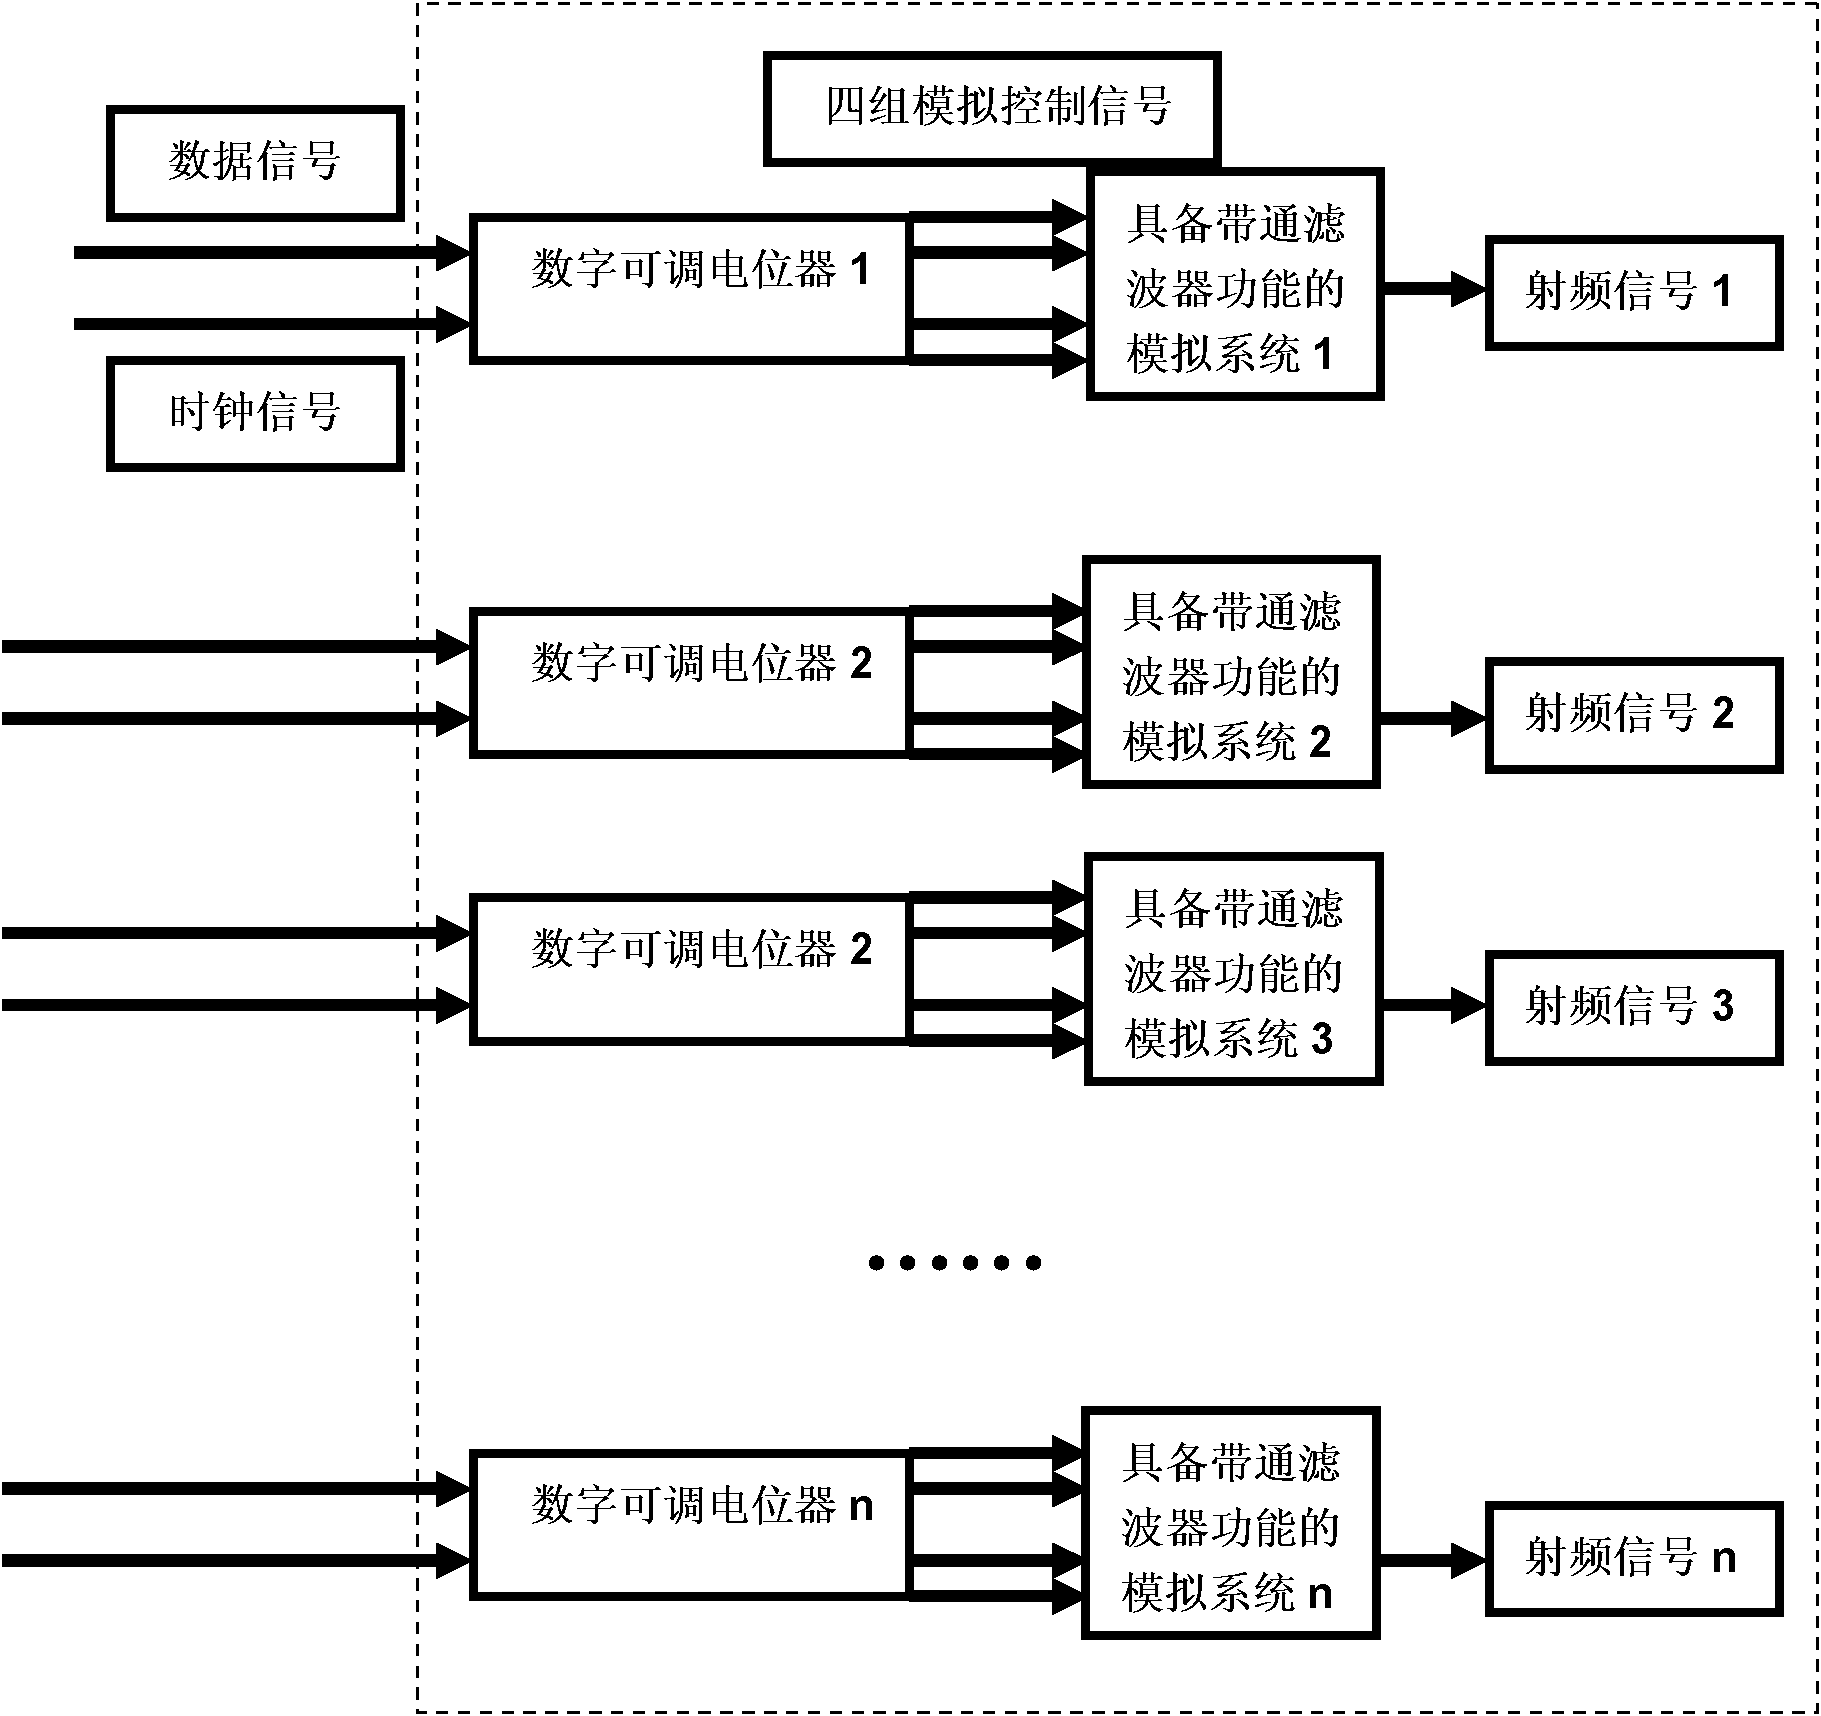 Automatic debugging system for radio-frequency signal products